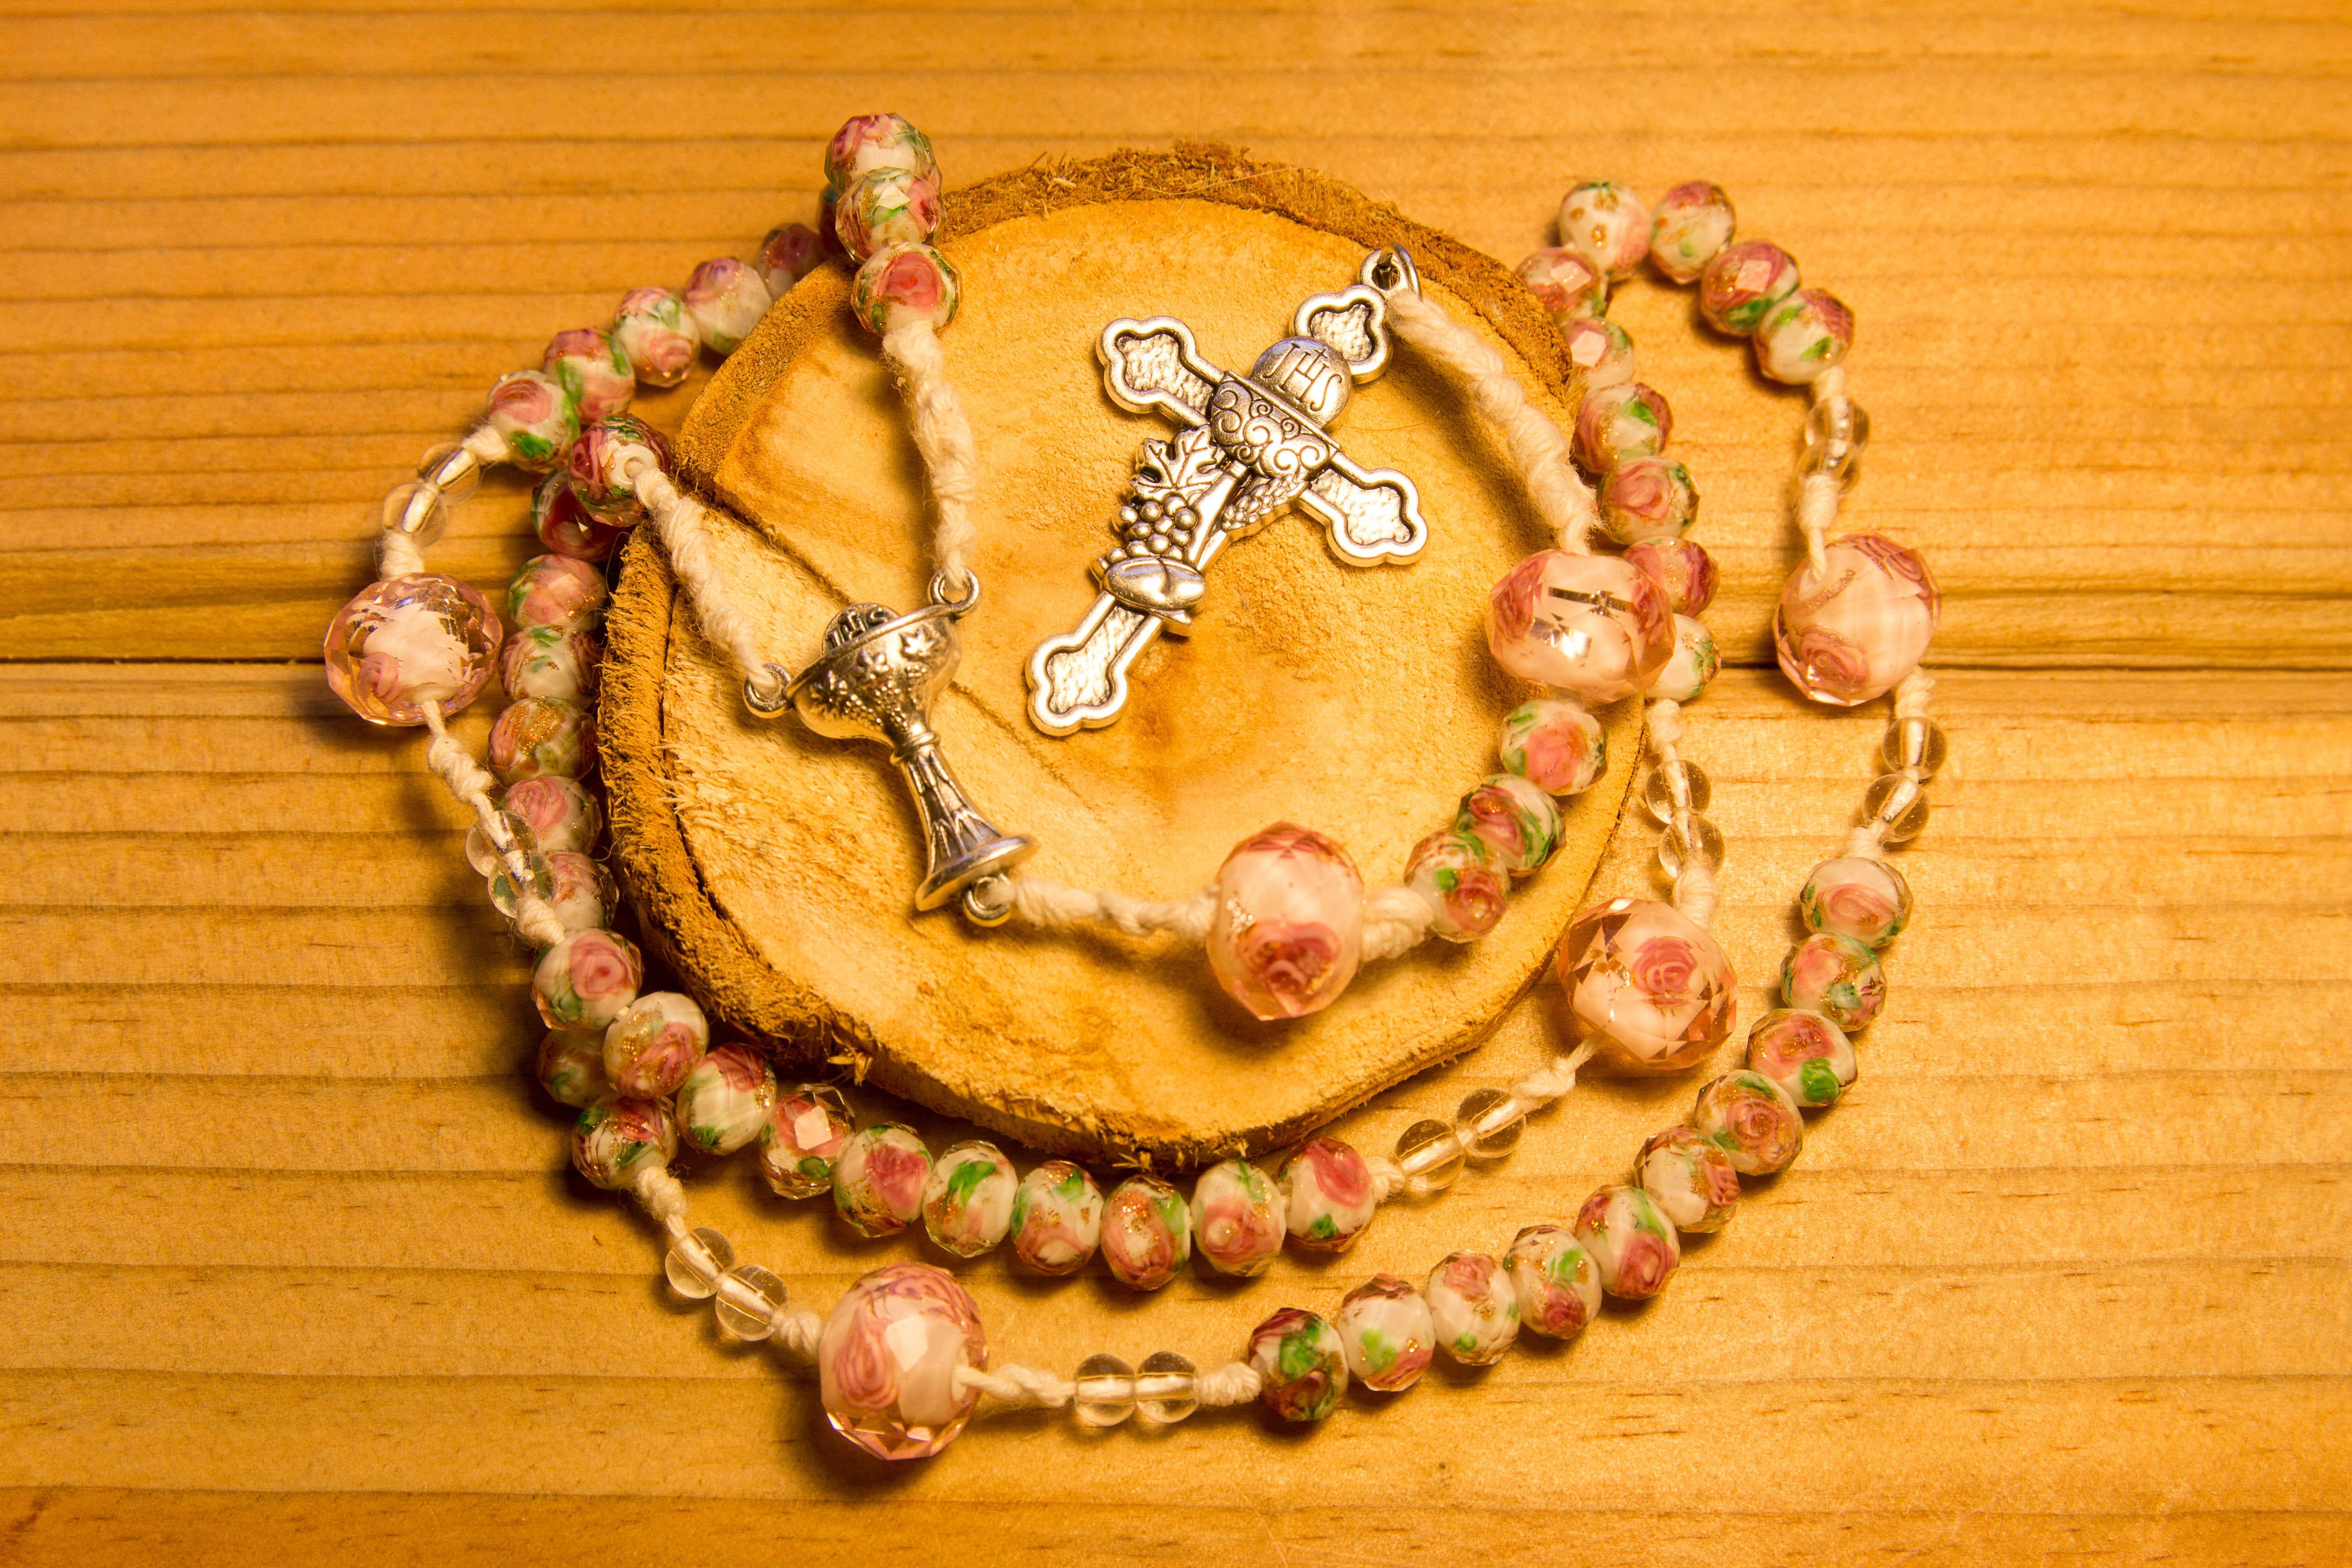 "The Little Flower" First Communion Rosary